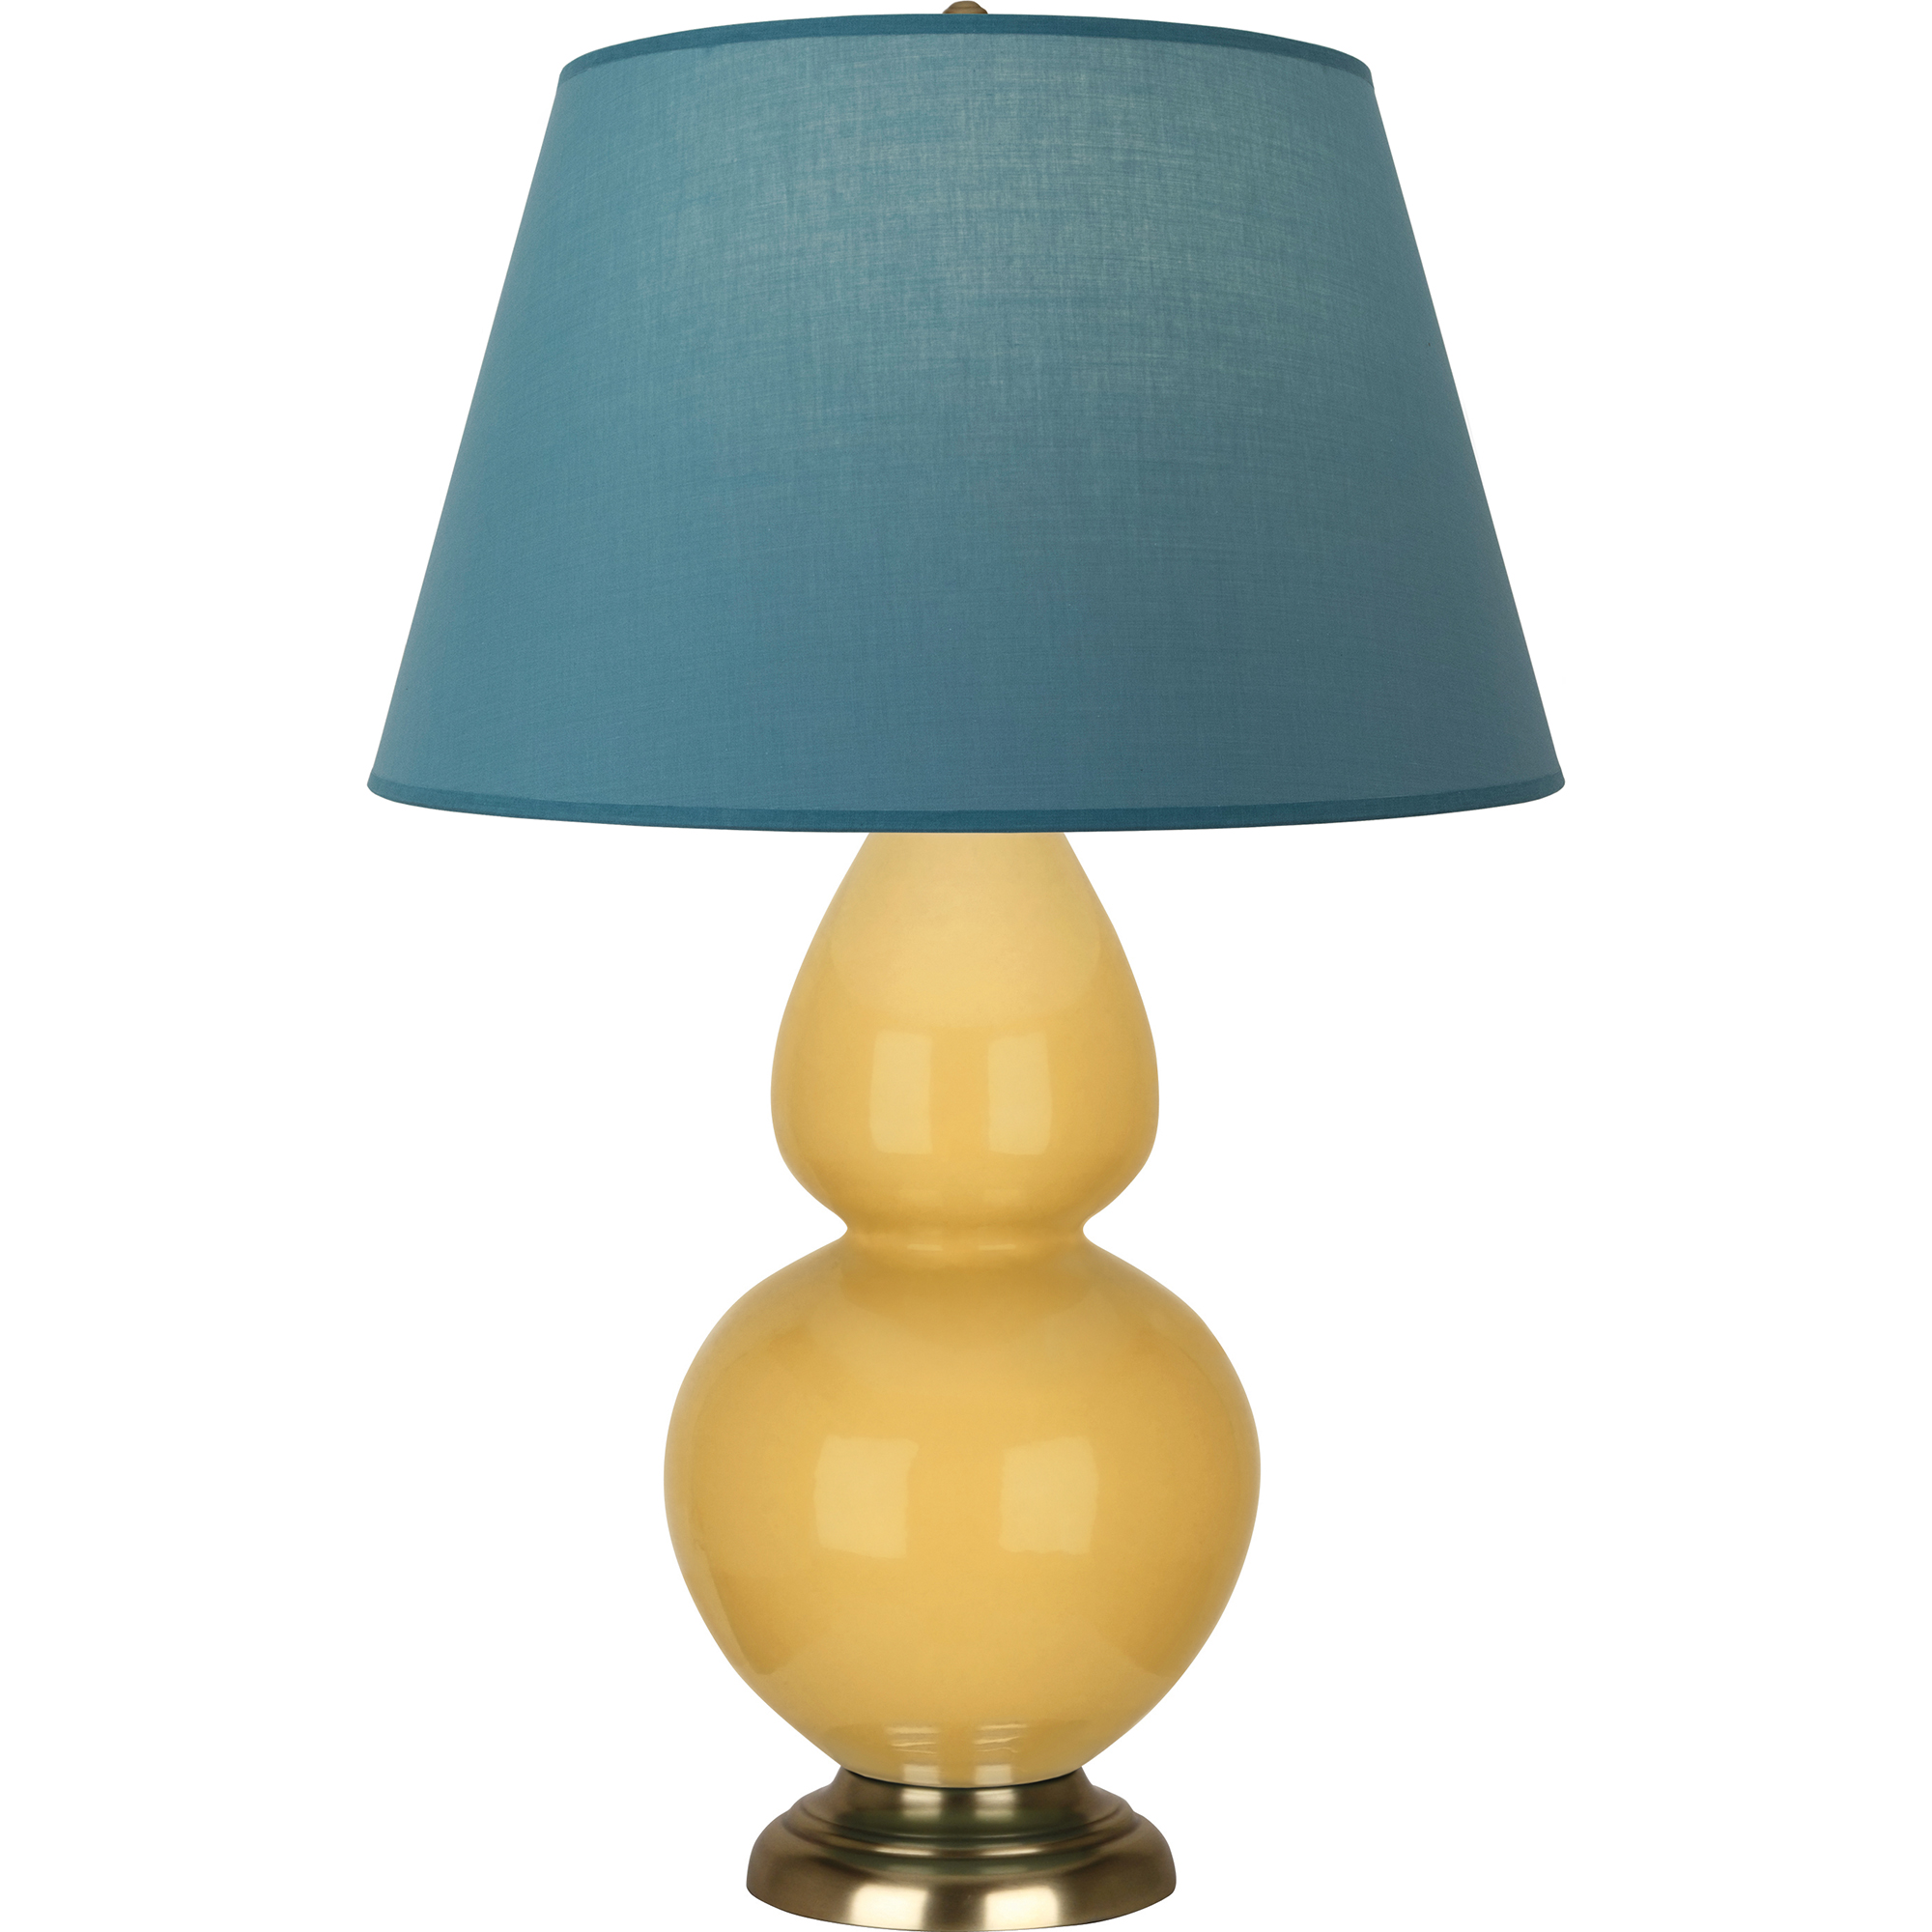 Double Gourd Table Lamp Style #SU20B